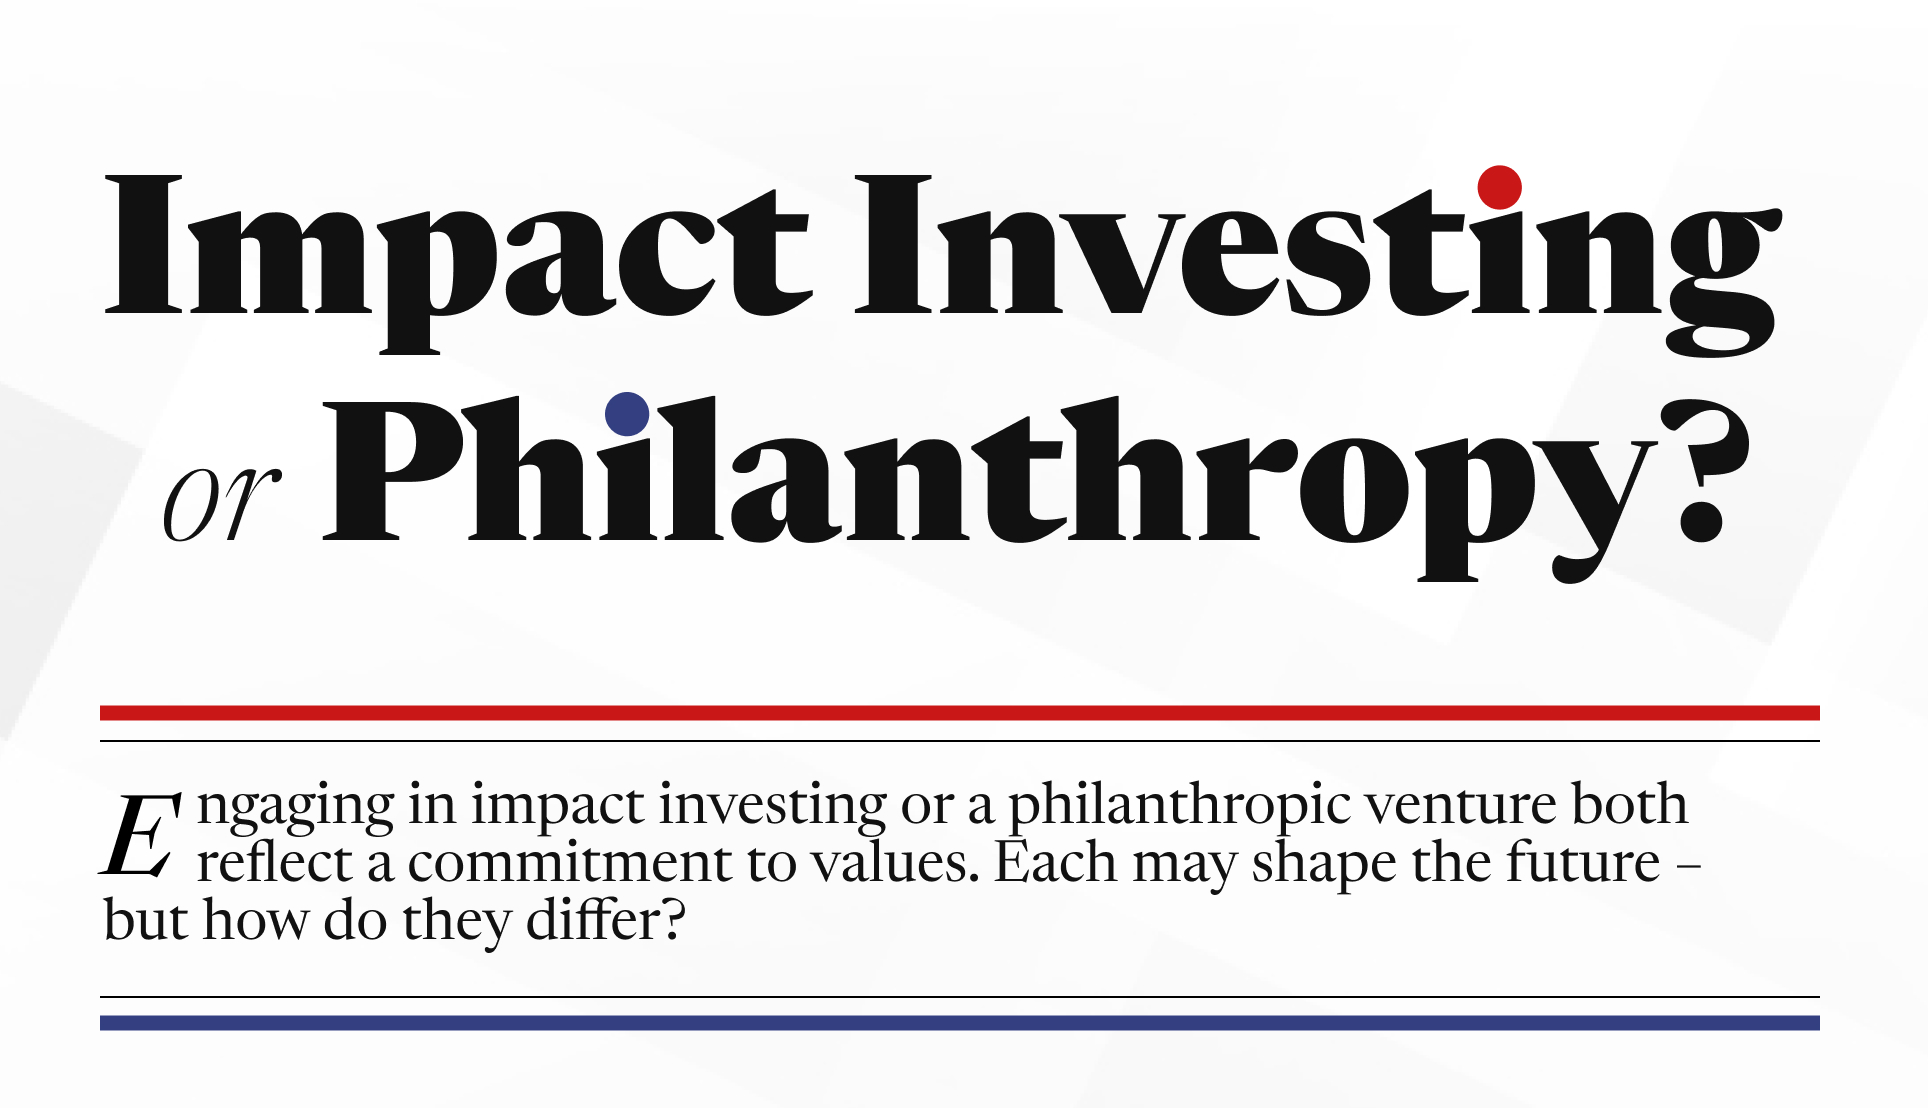 The title of the piece, Impact Investing or Philanthropy, rests atop the following: Engaging in impact investing or a philanthropic venture both reflect a commitment to values. Each may shape the future – but how do they differ?